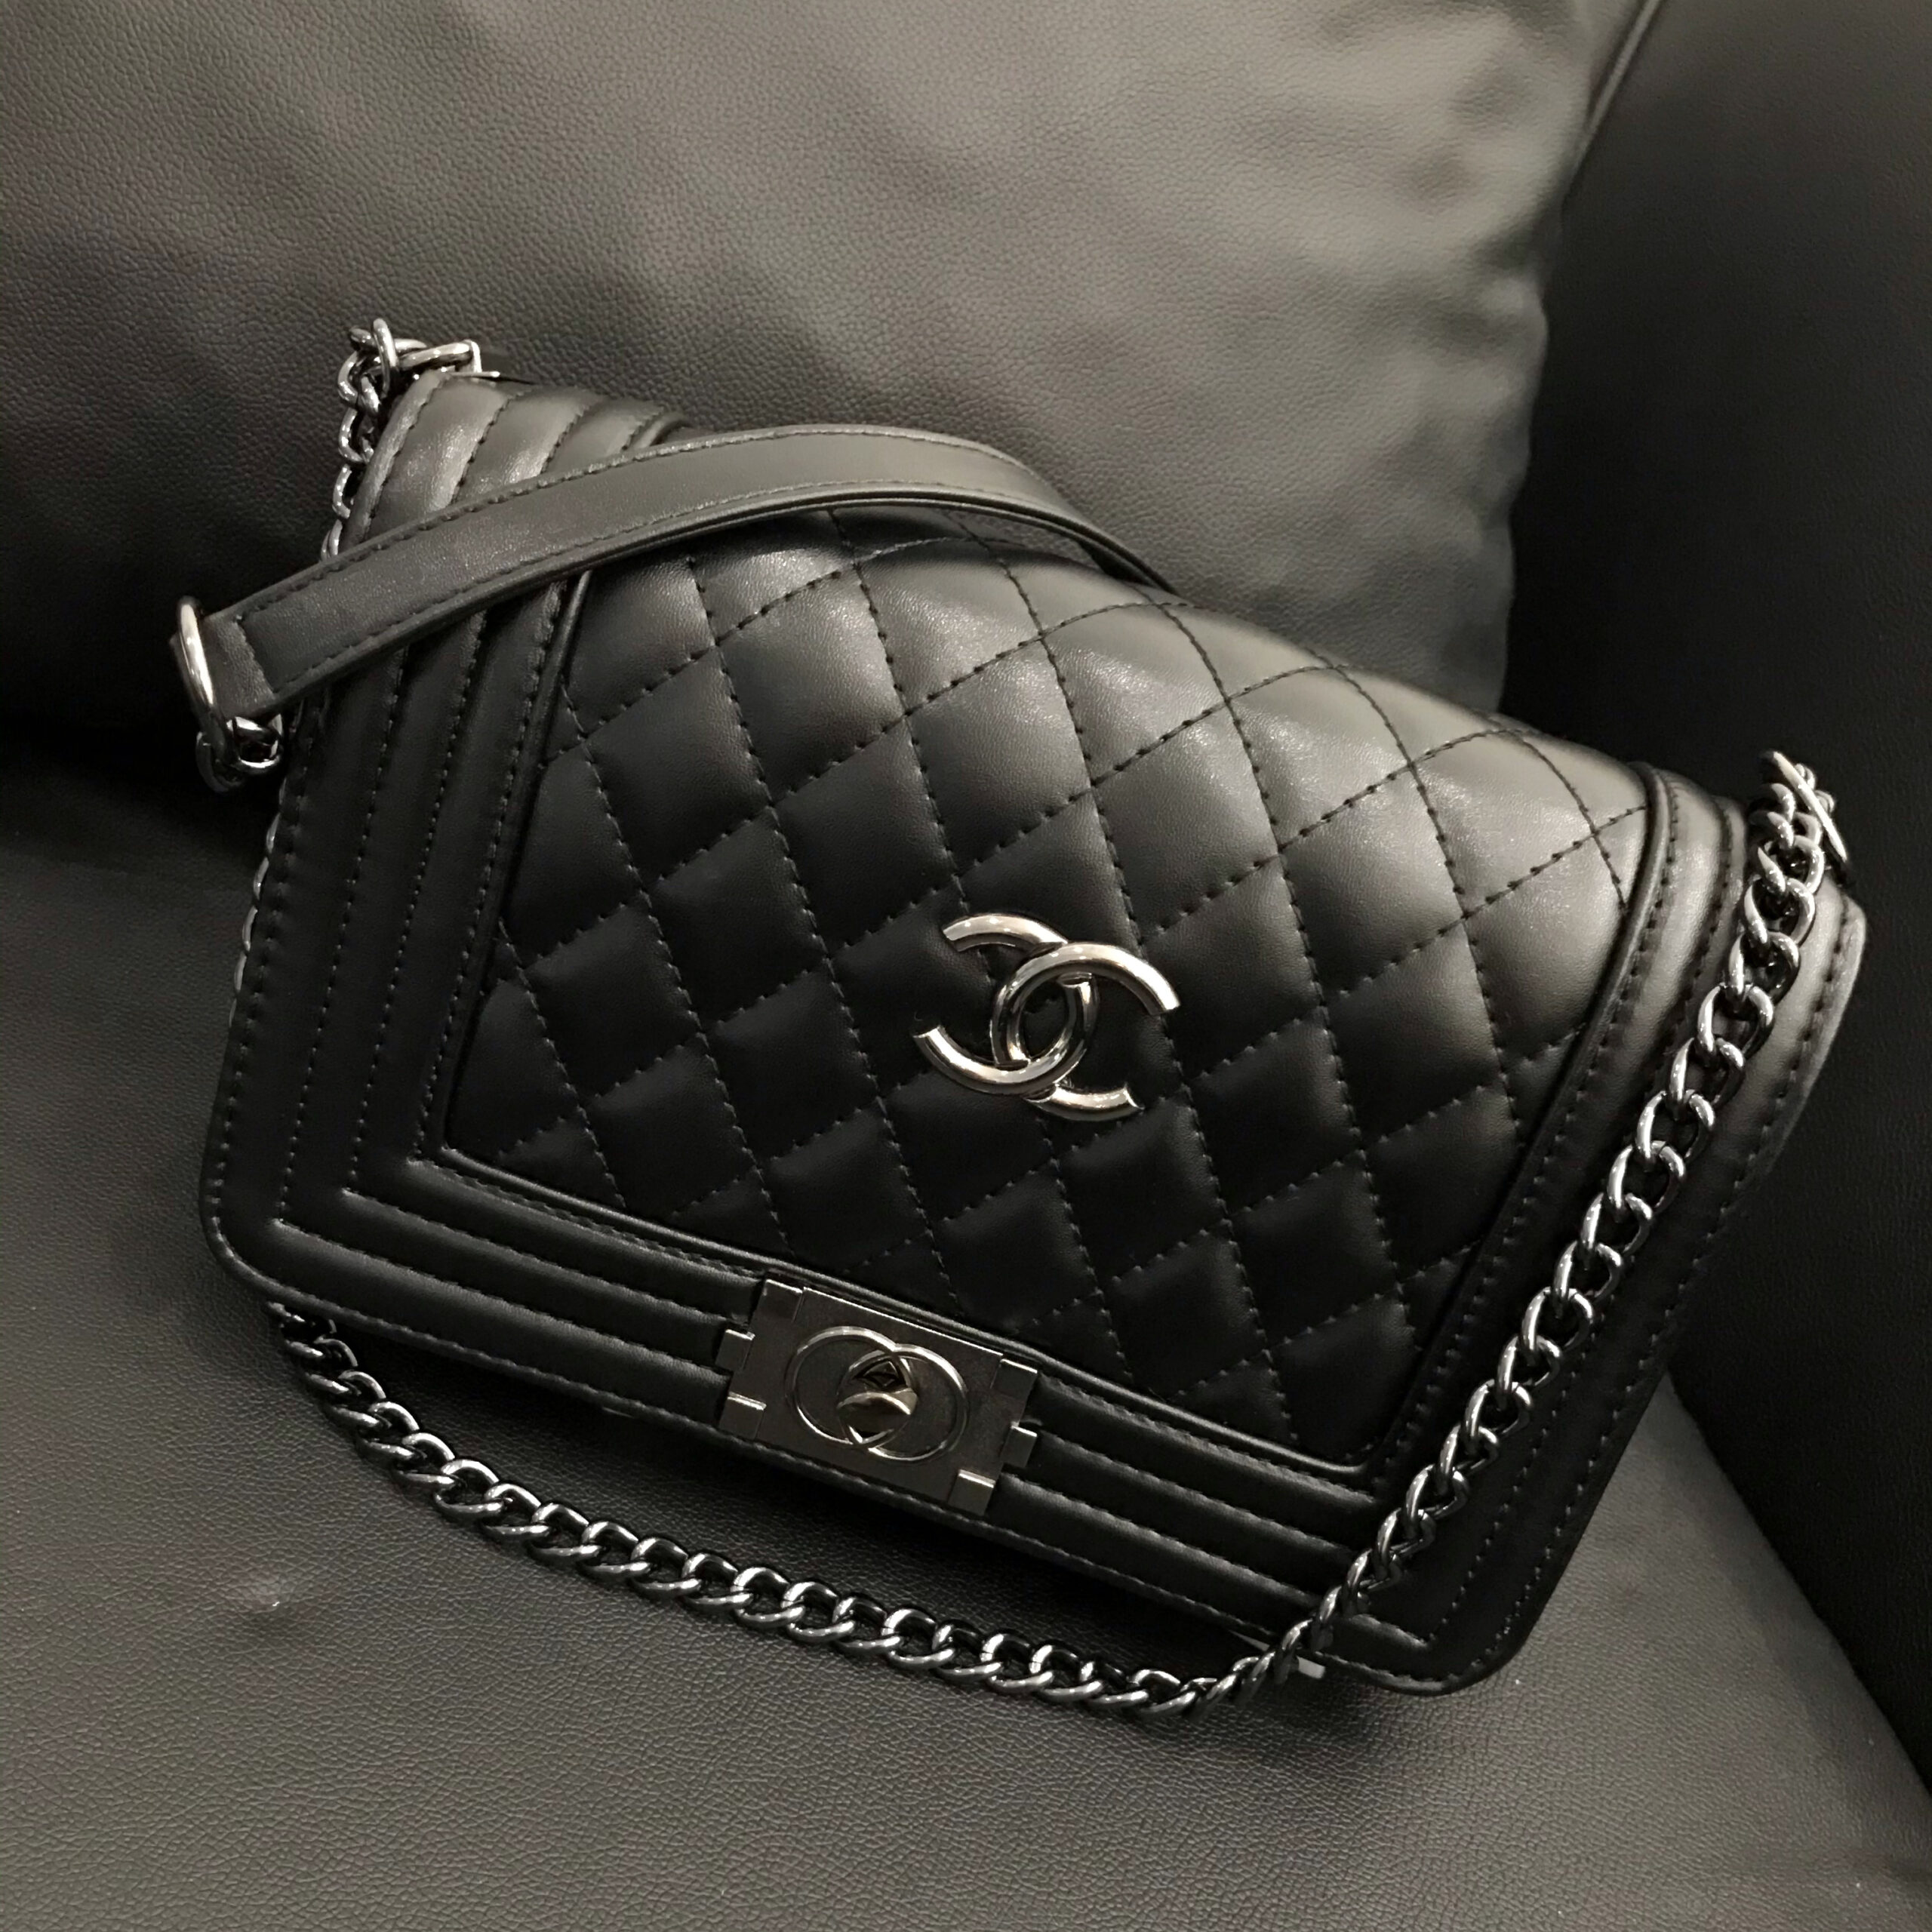 Buy online Chanel Handbag at low price & get delivery worldwide